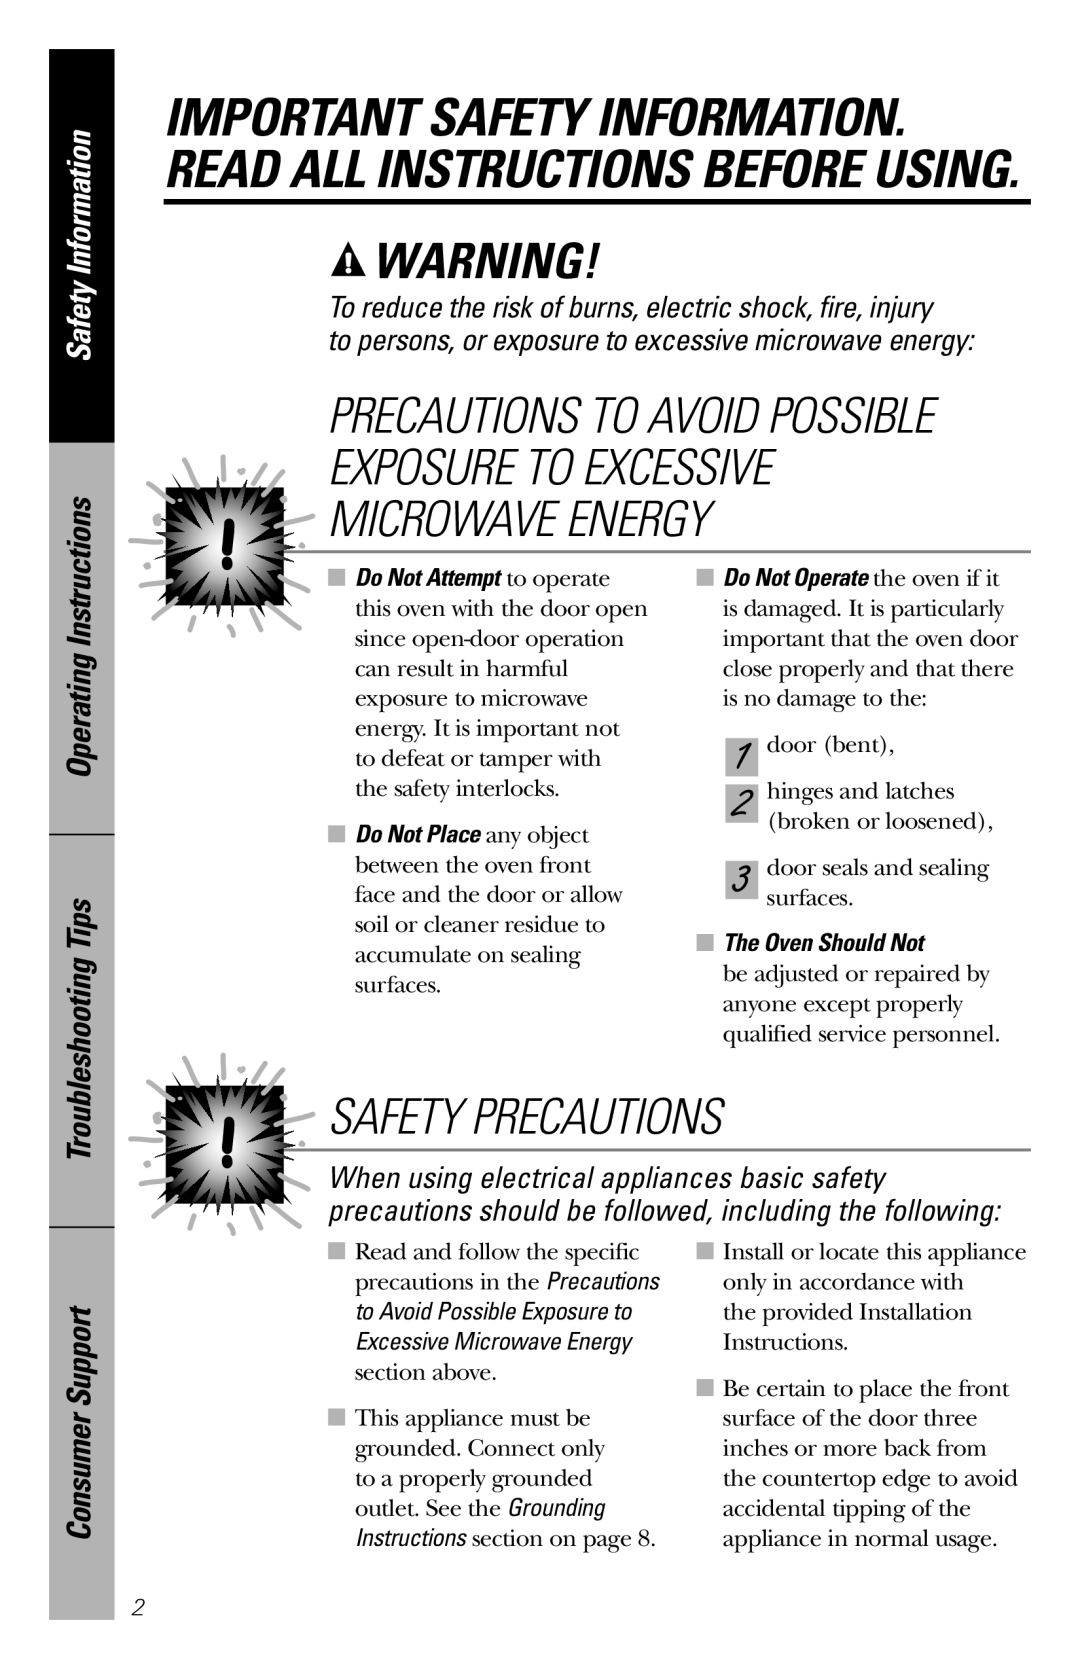 GE WES1130 owner manual Exposure To Excessive Microwave Energy, Safety Precautions, Safety Information, Consumer Support 